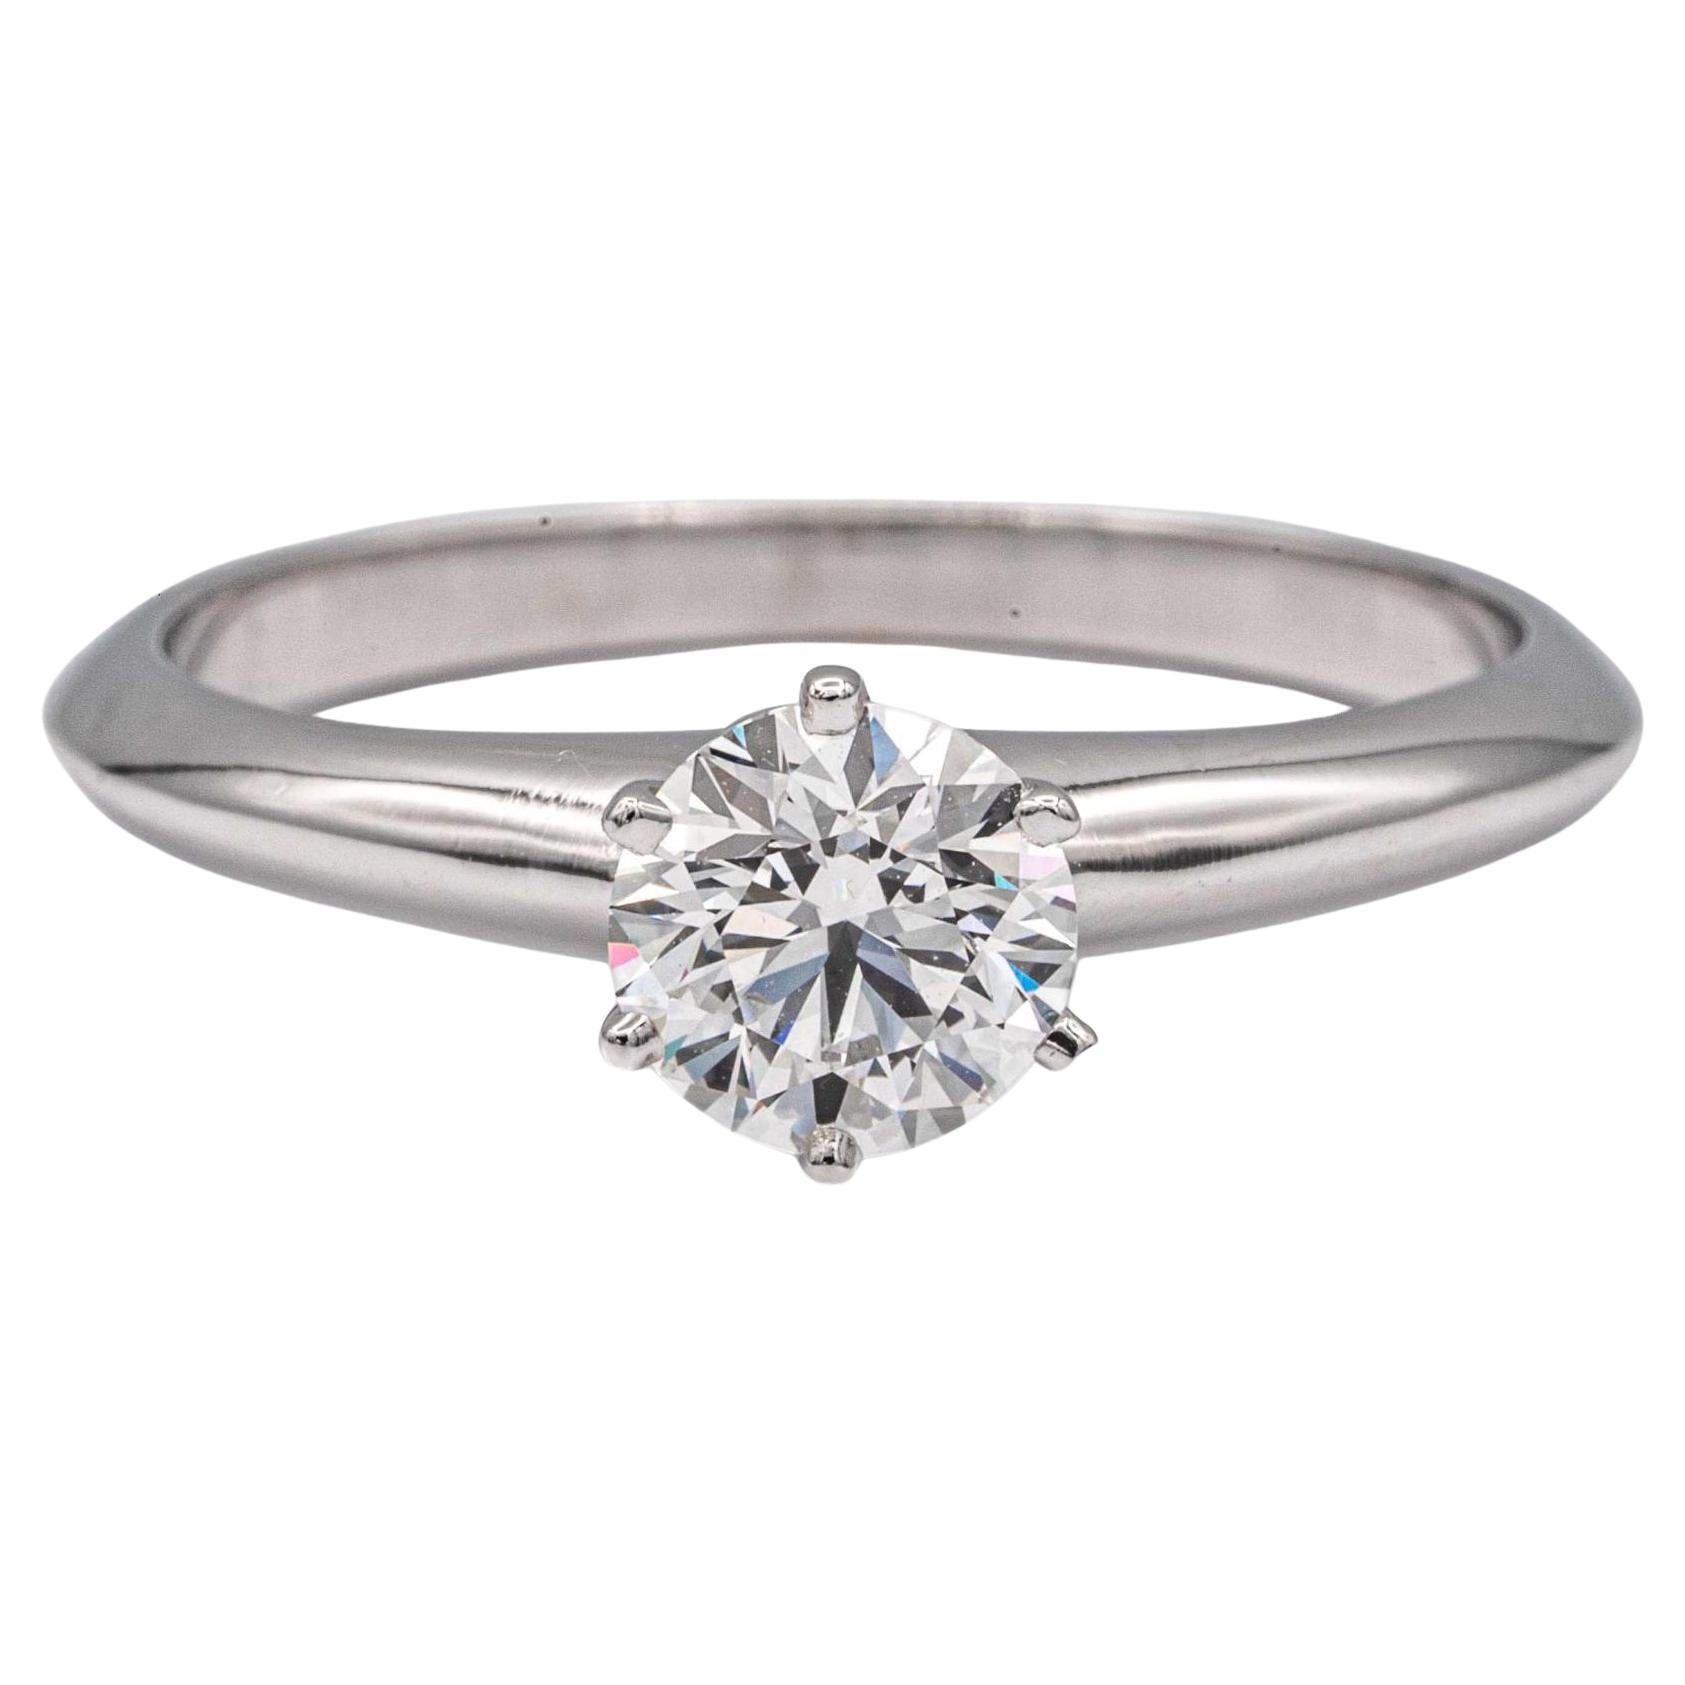 Tiffany & Co. Platinum Solitaire Diamond Engagement Ring with Round 0.61 Ct GVVS